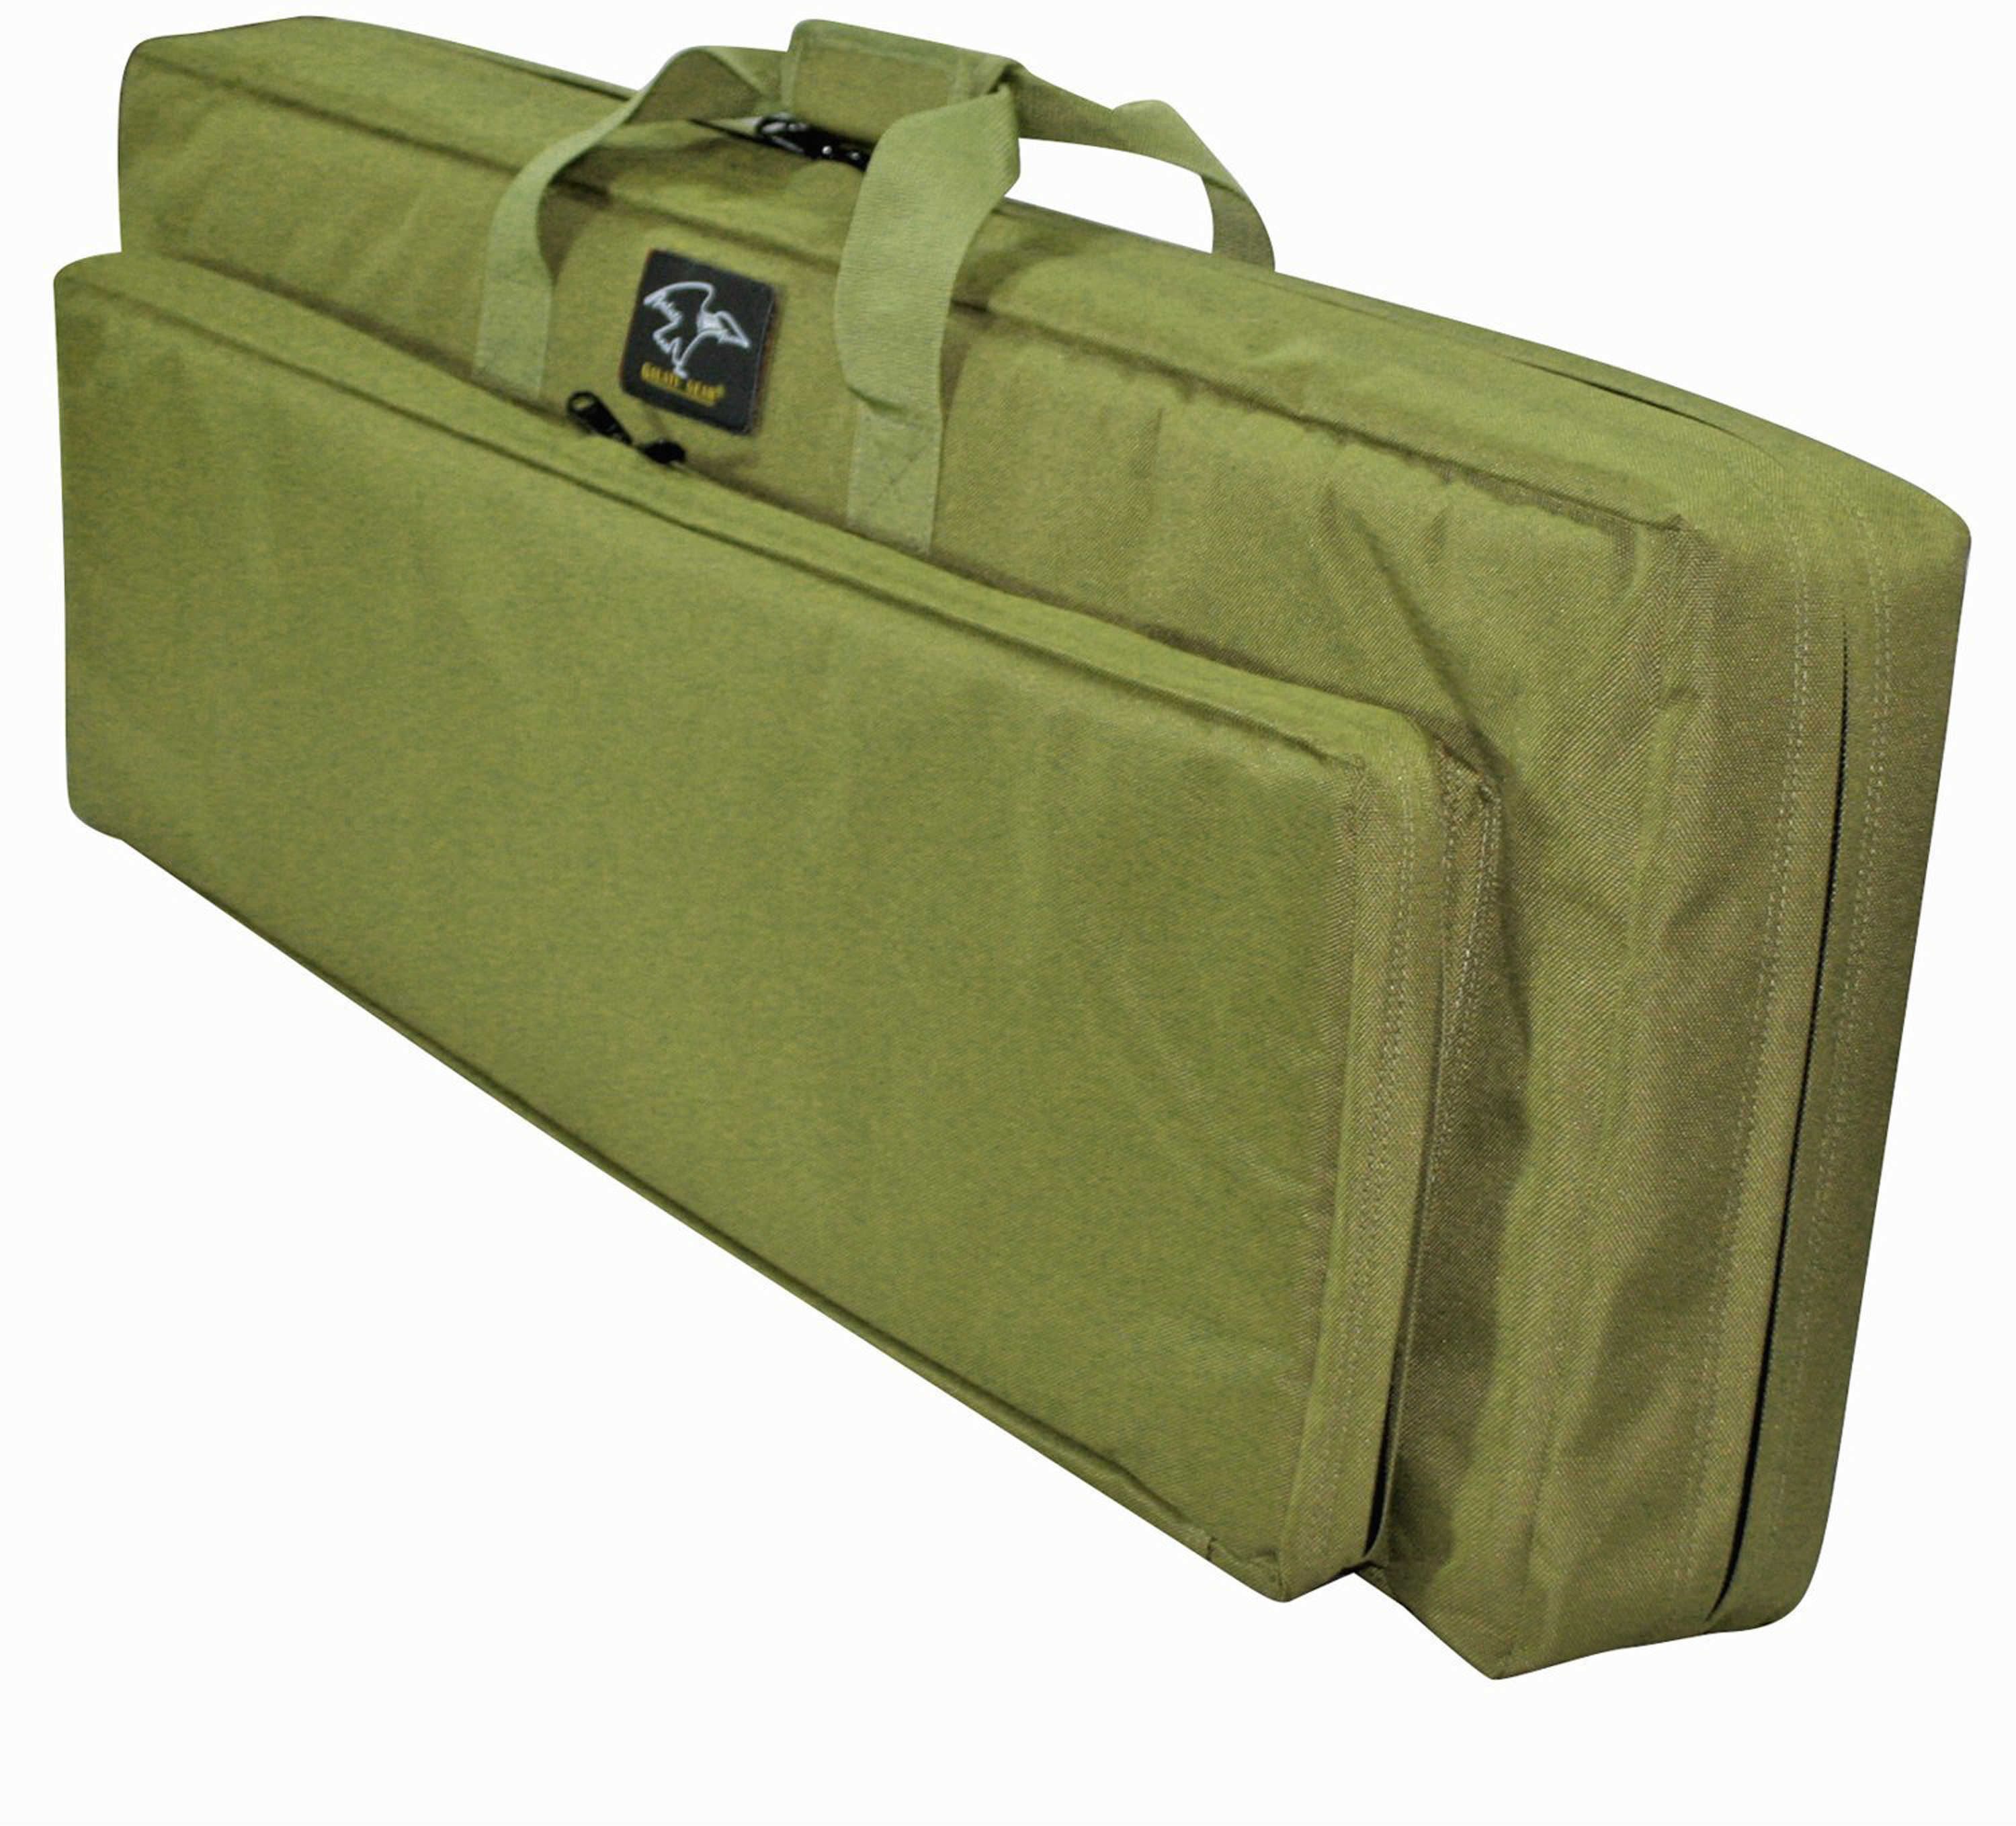 Double Discreet Square Rifle Case - 42", Olive Drab Md: SQ42DOD